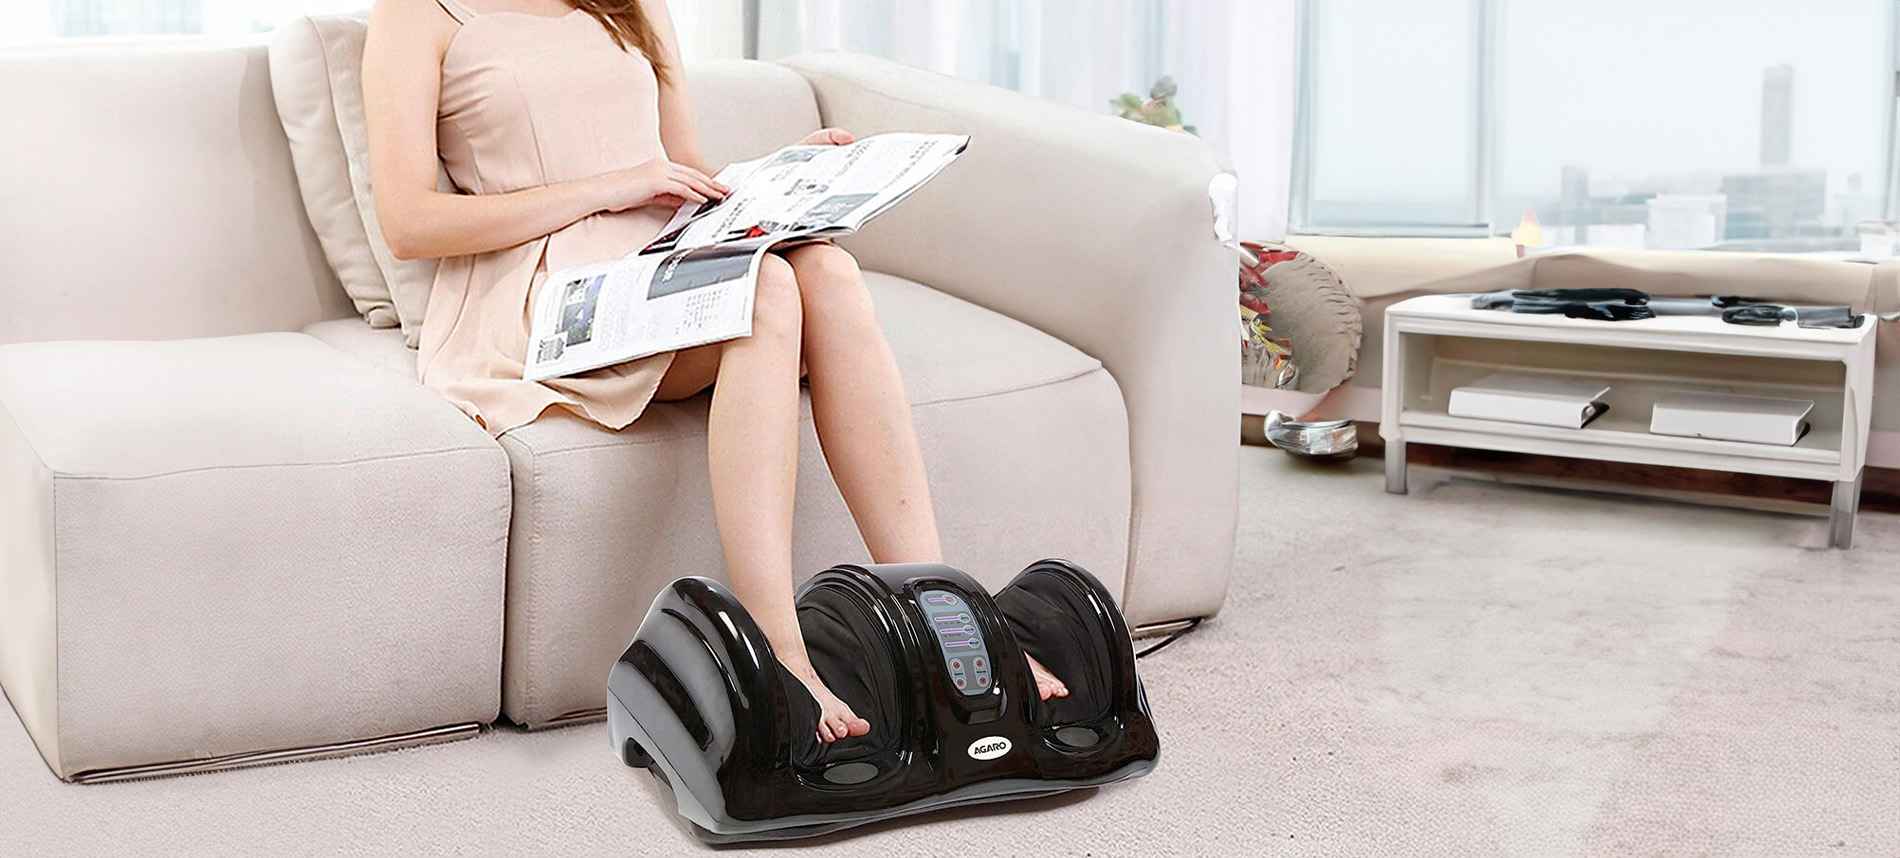 Explore the Best Foot Massager India Offers: 5 Top Choices – Agaro